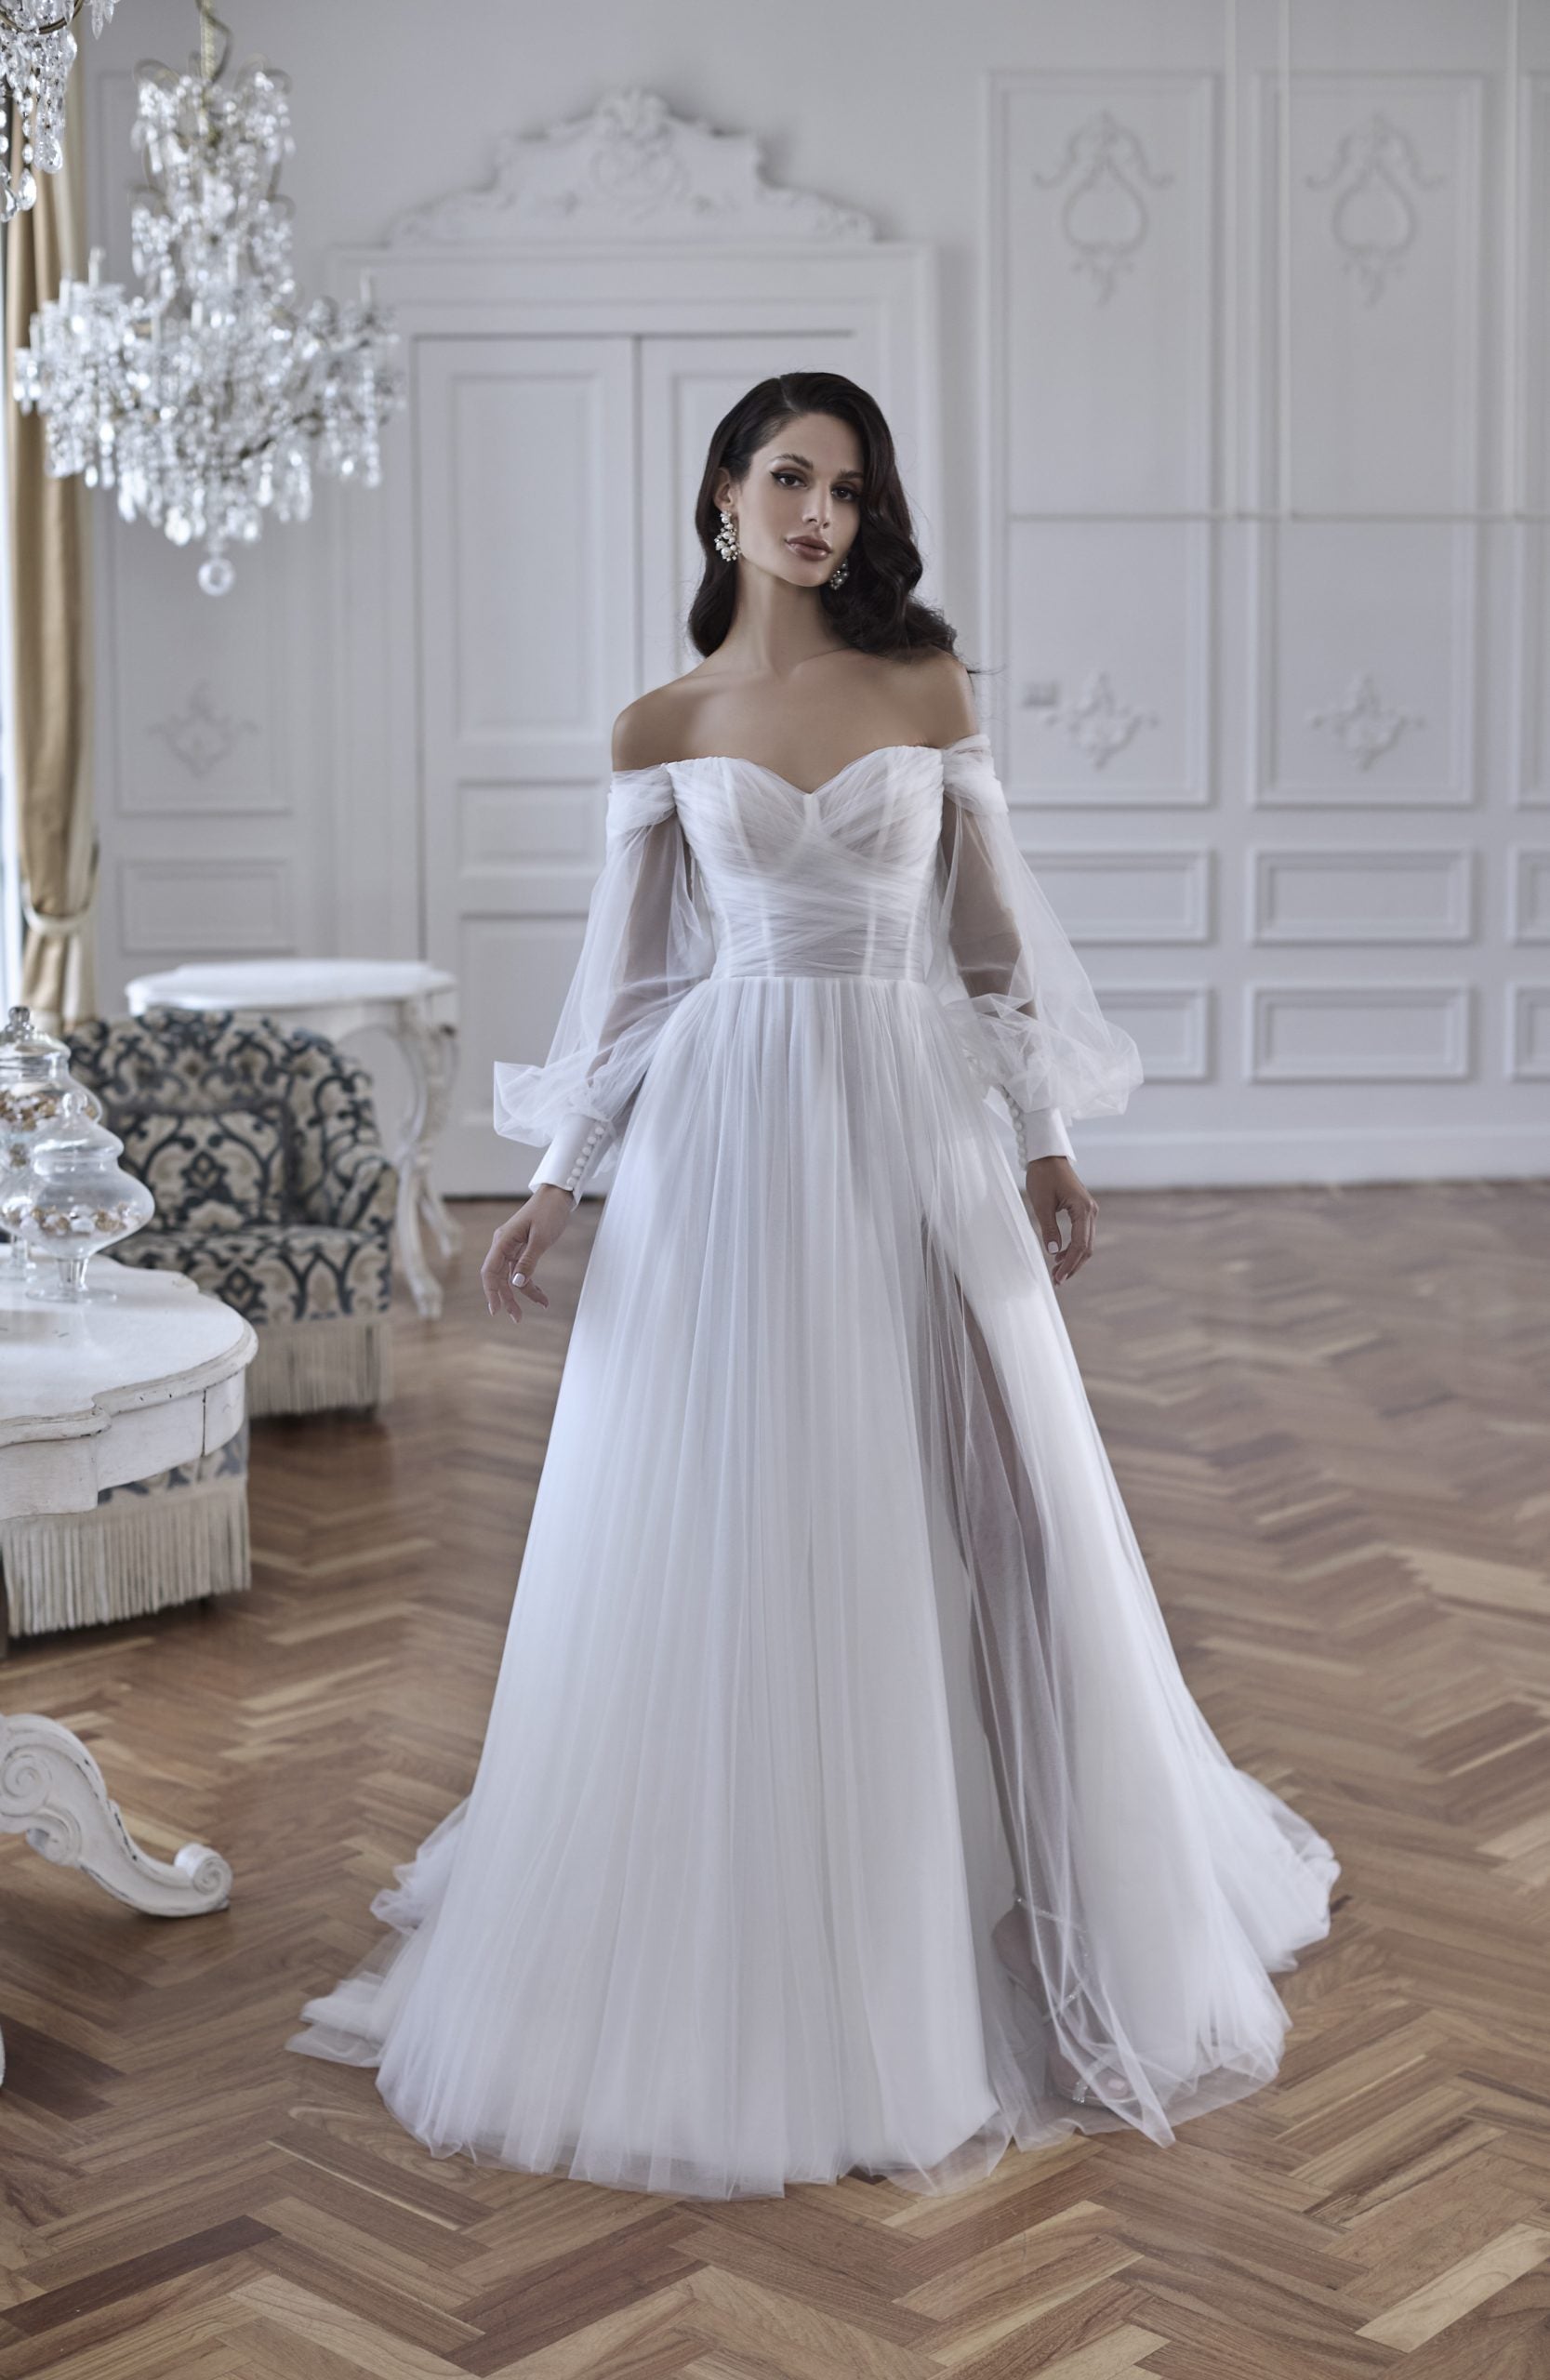 A-line Wedding Dress With Off The Shoulder Long Sleeves by Maison Signore - Image 1